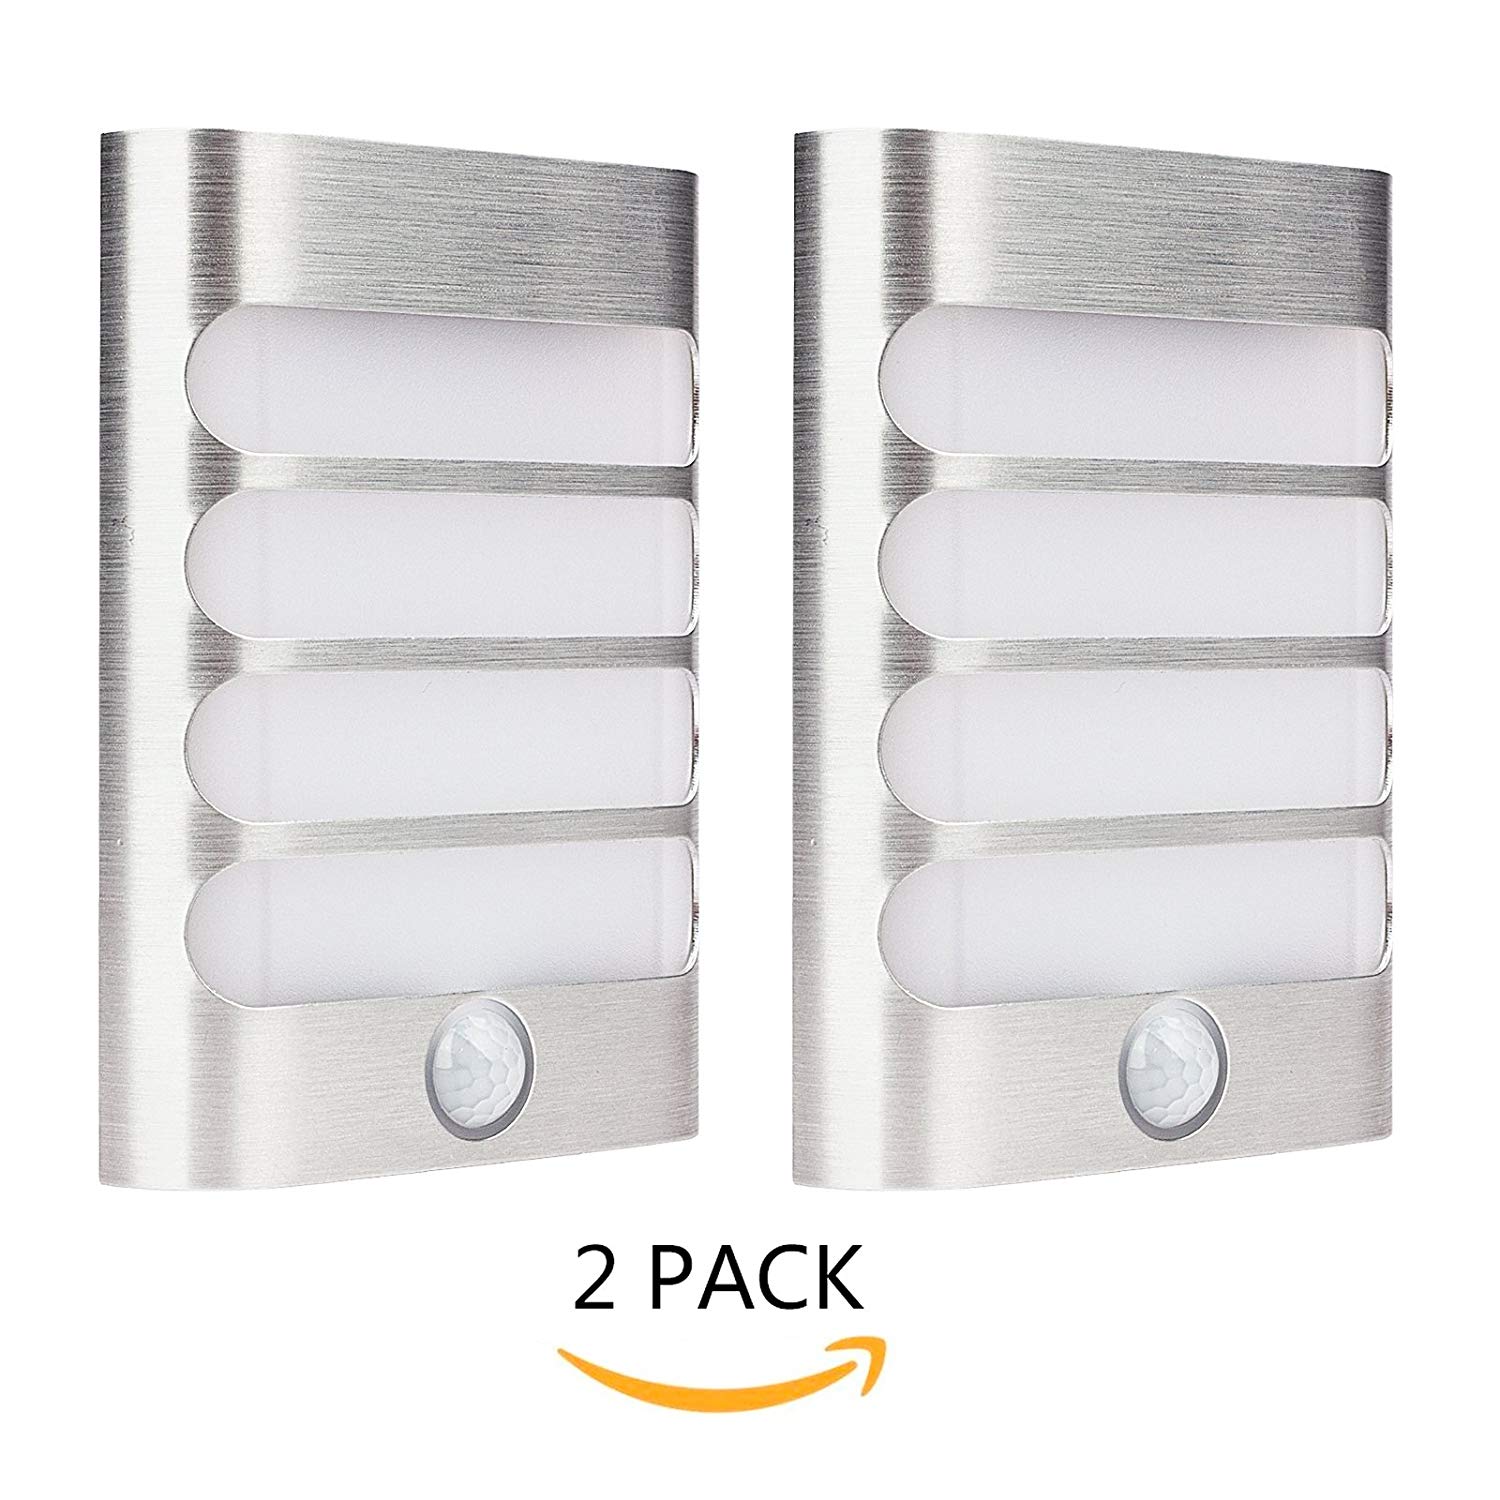 Leadleds Motion Night Light Battery Operated Auto ON OFF for Hallway Closet Staircase Garden, 2 Pack - Leadleds